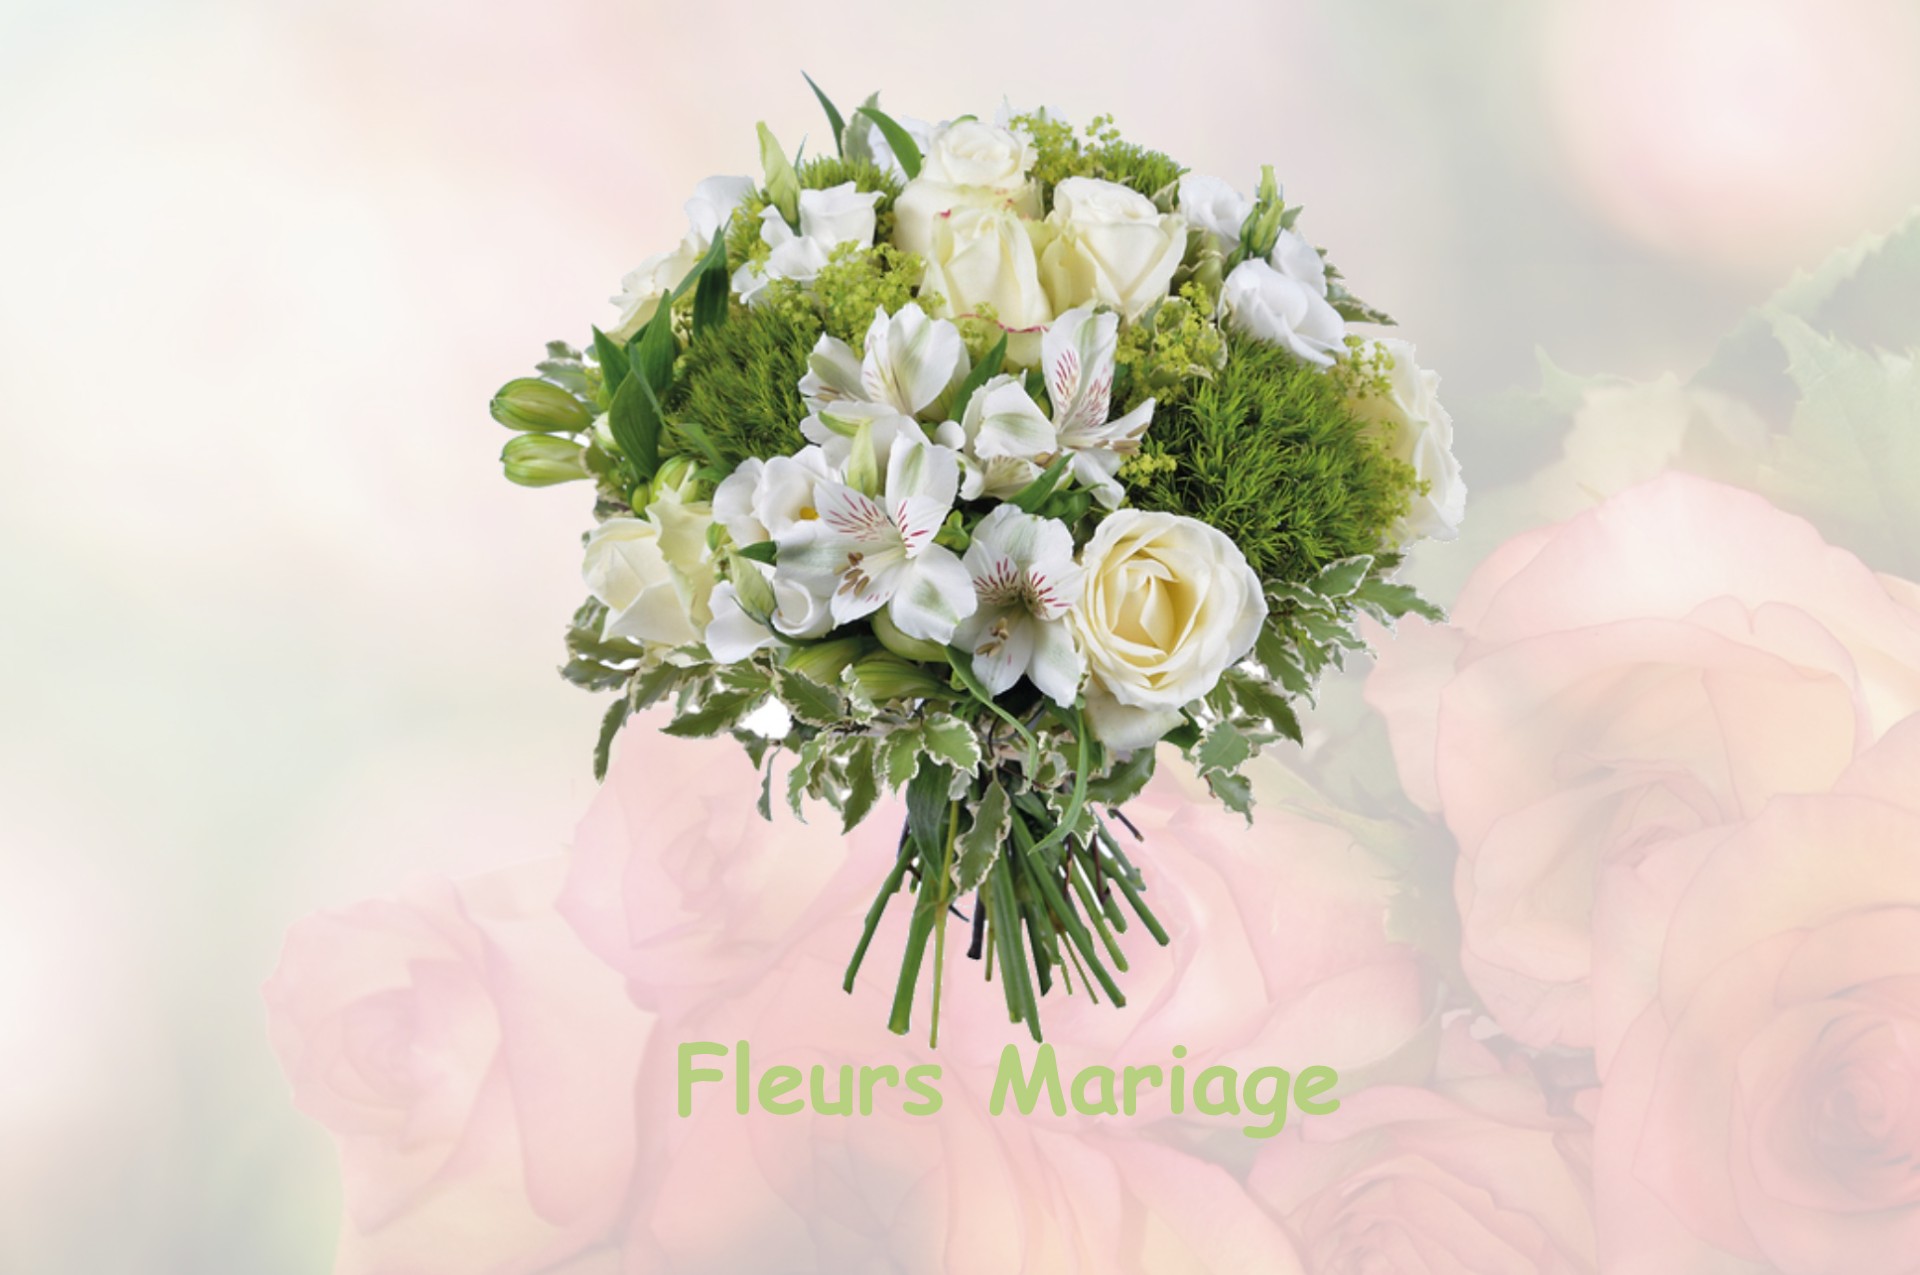 fleurs mariage BUSSUS-BUSSUEL